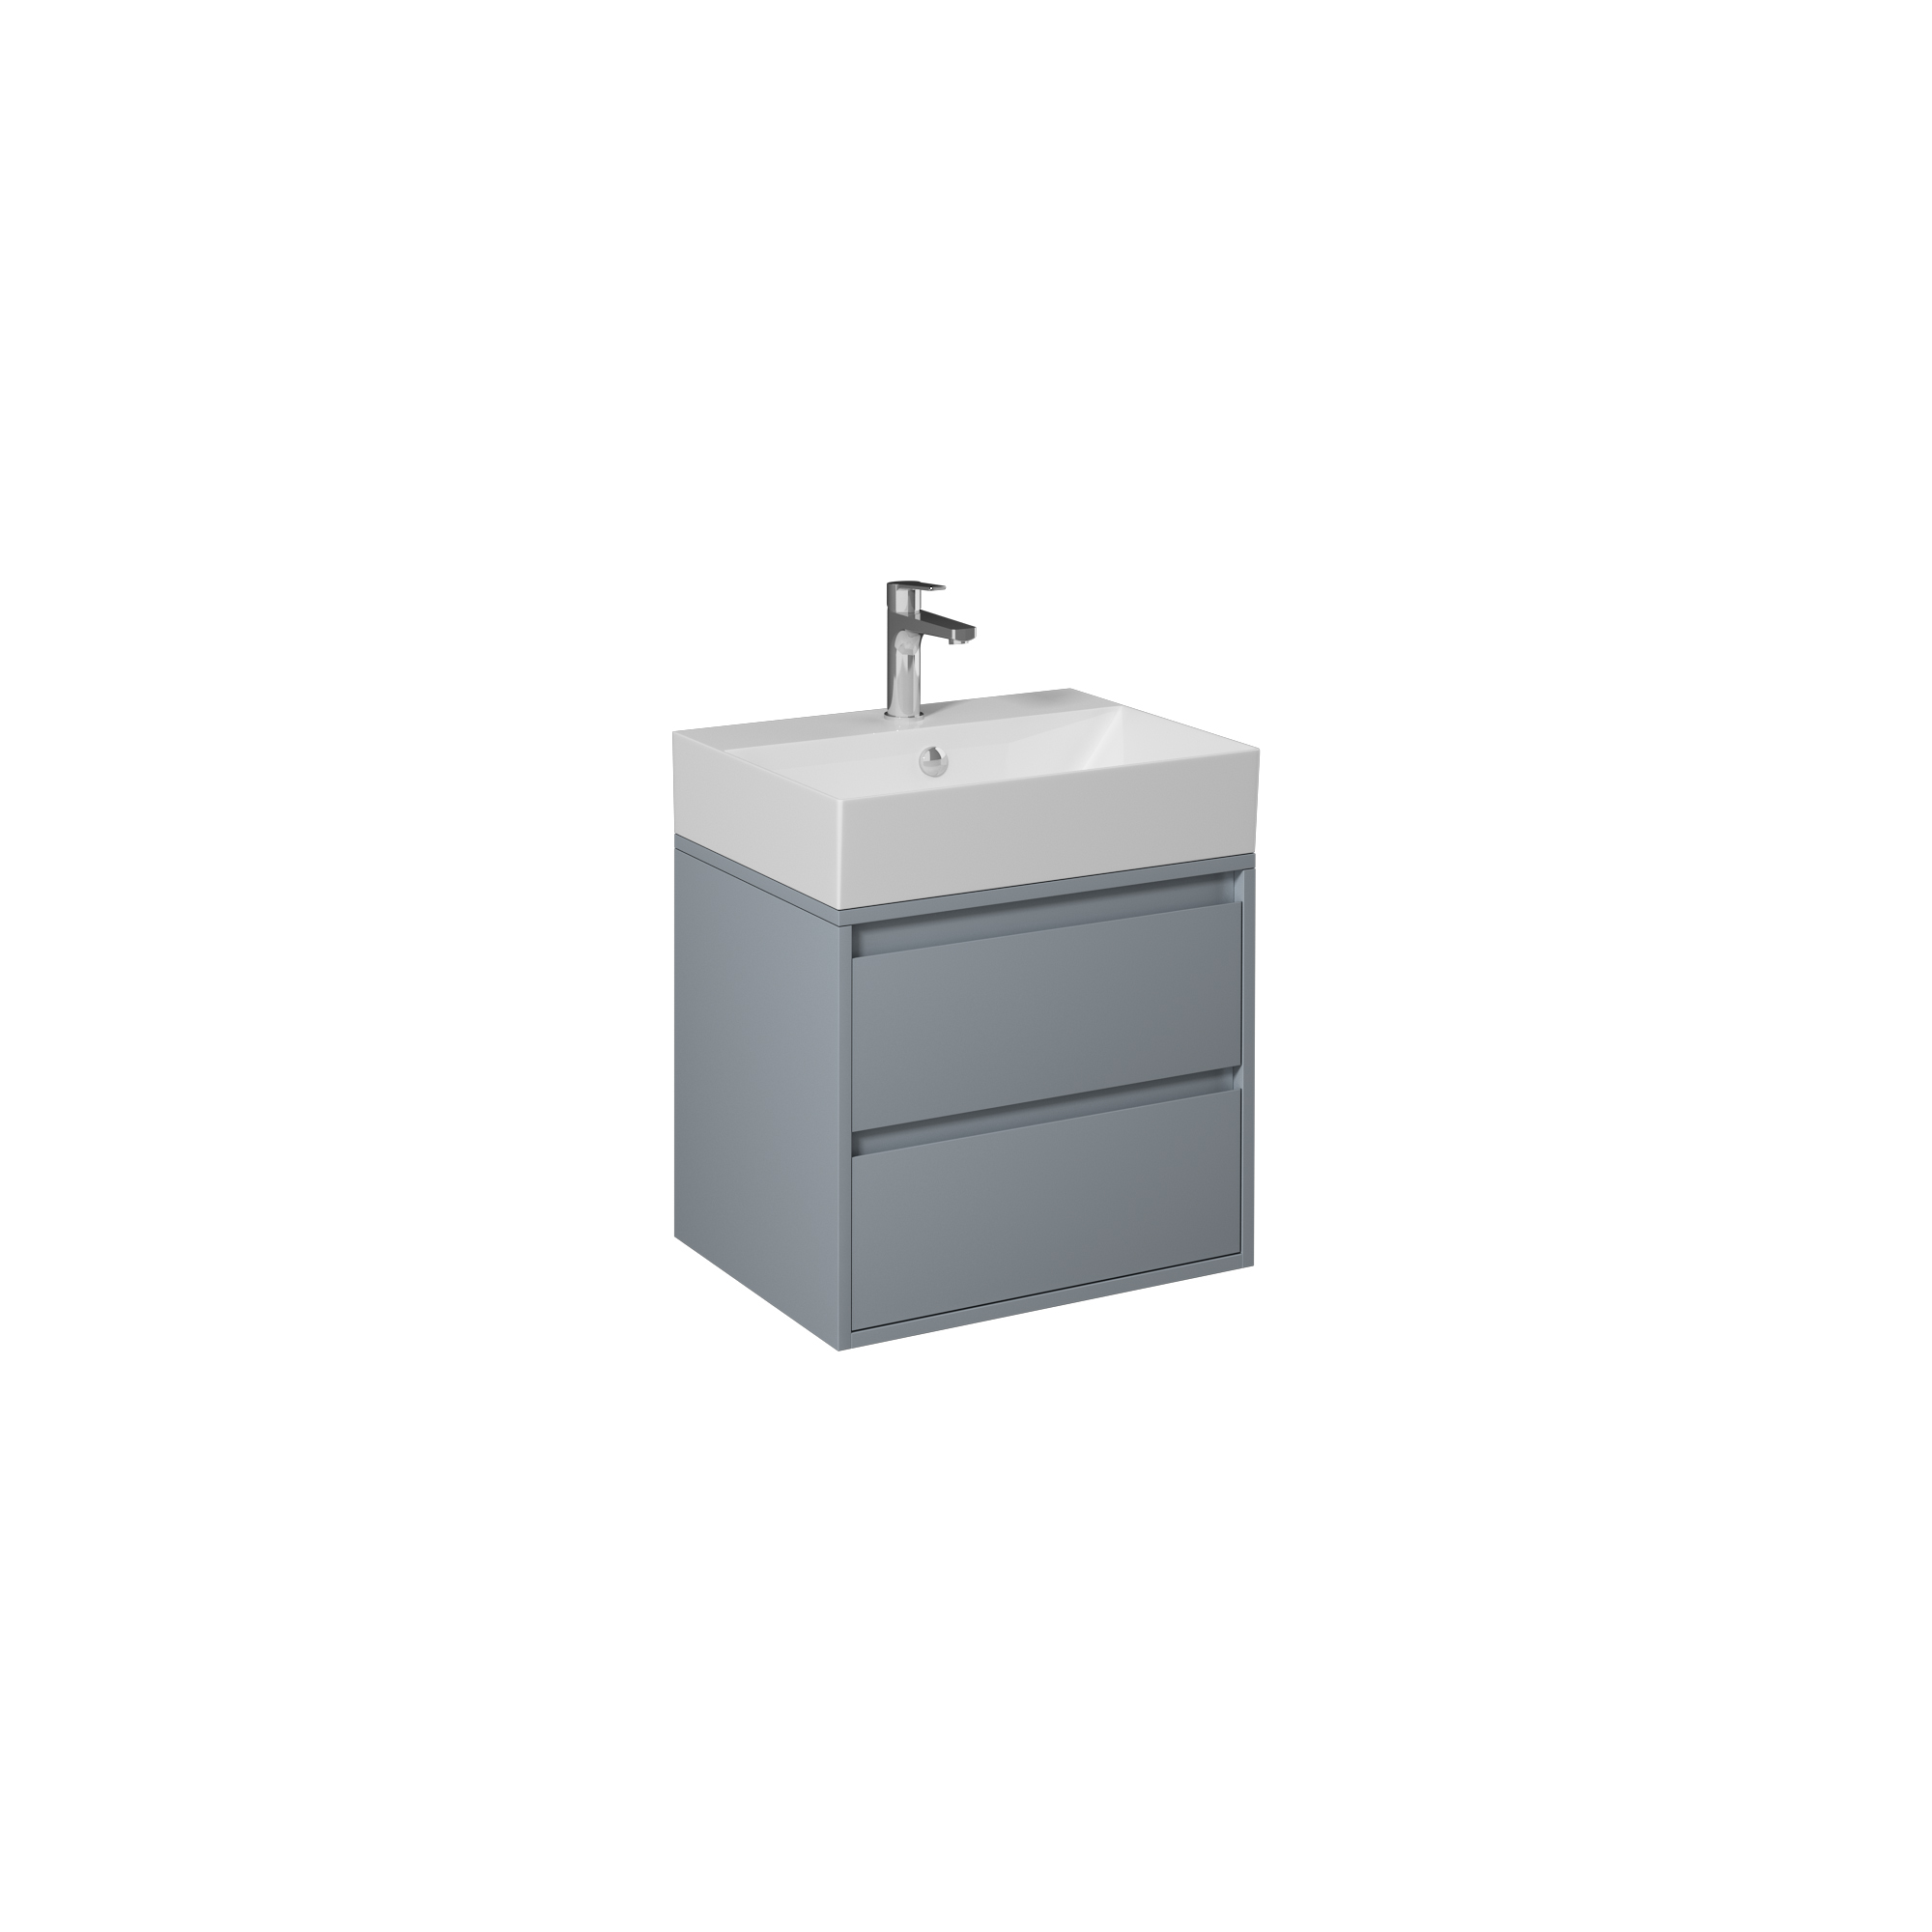 Pro Cabinet Washbasin Cabinet, Anthracite Lacquer Double Drawer 47"